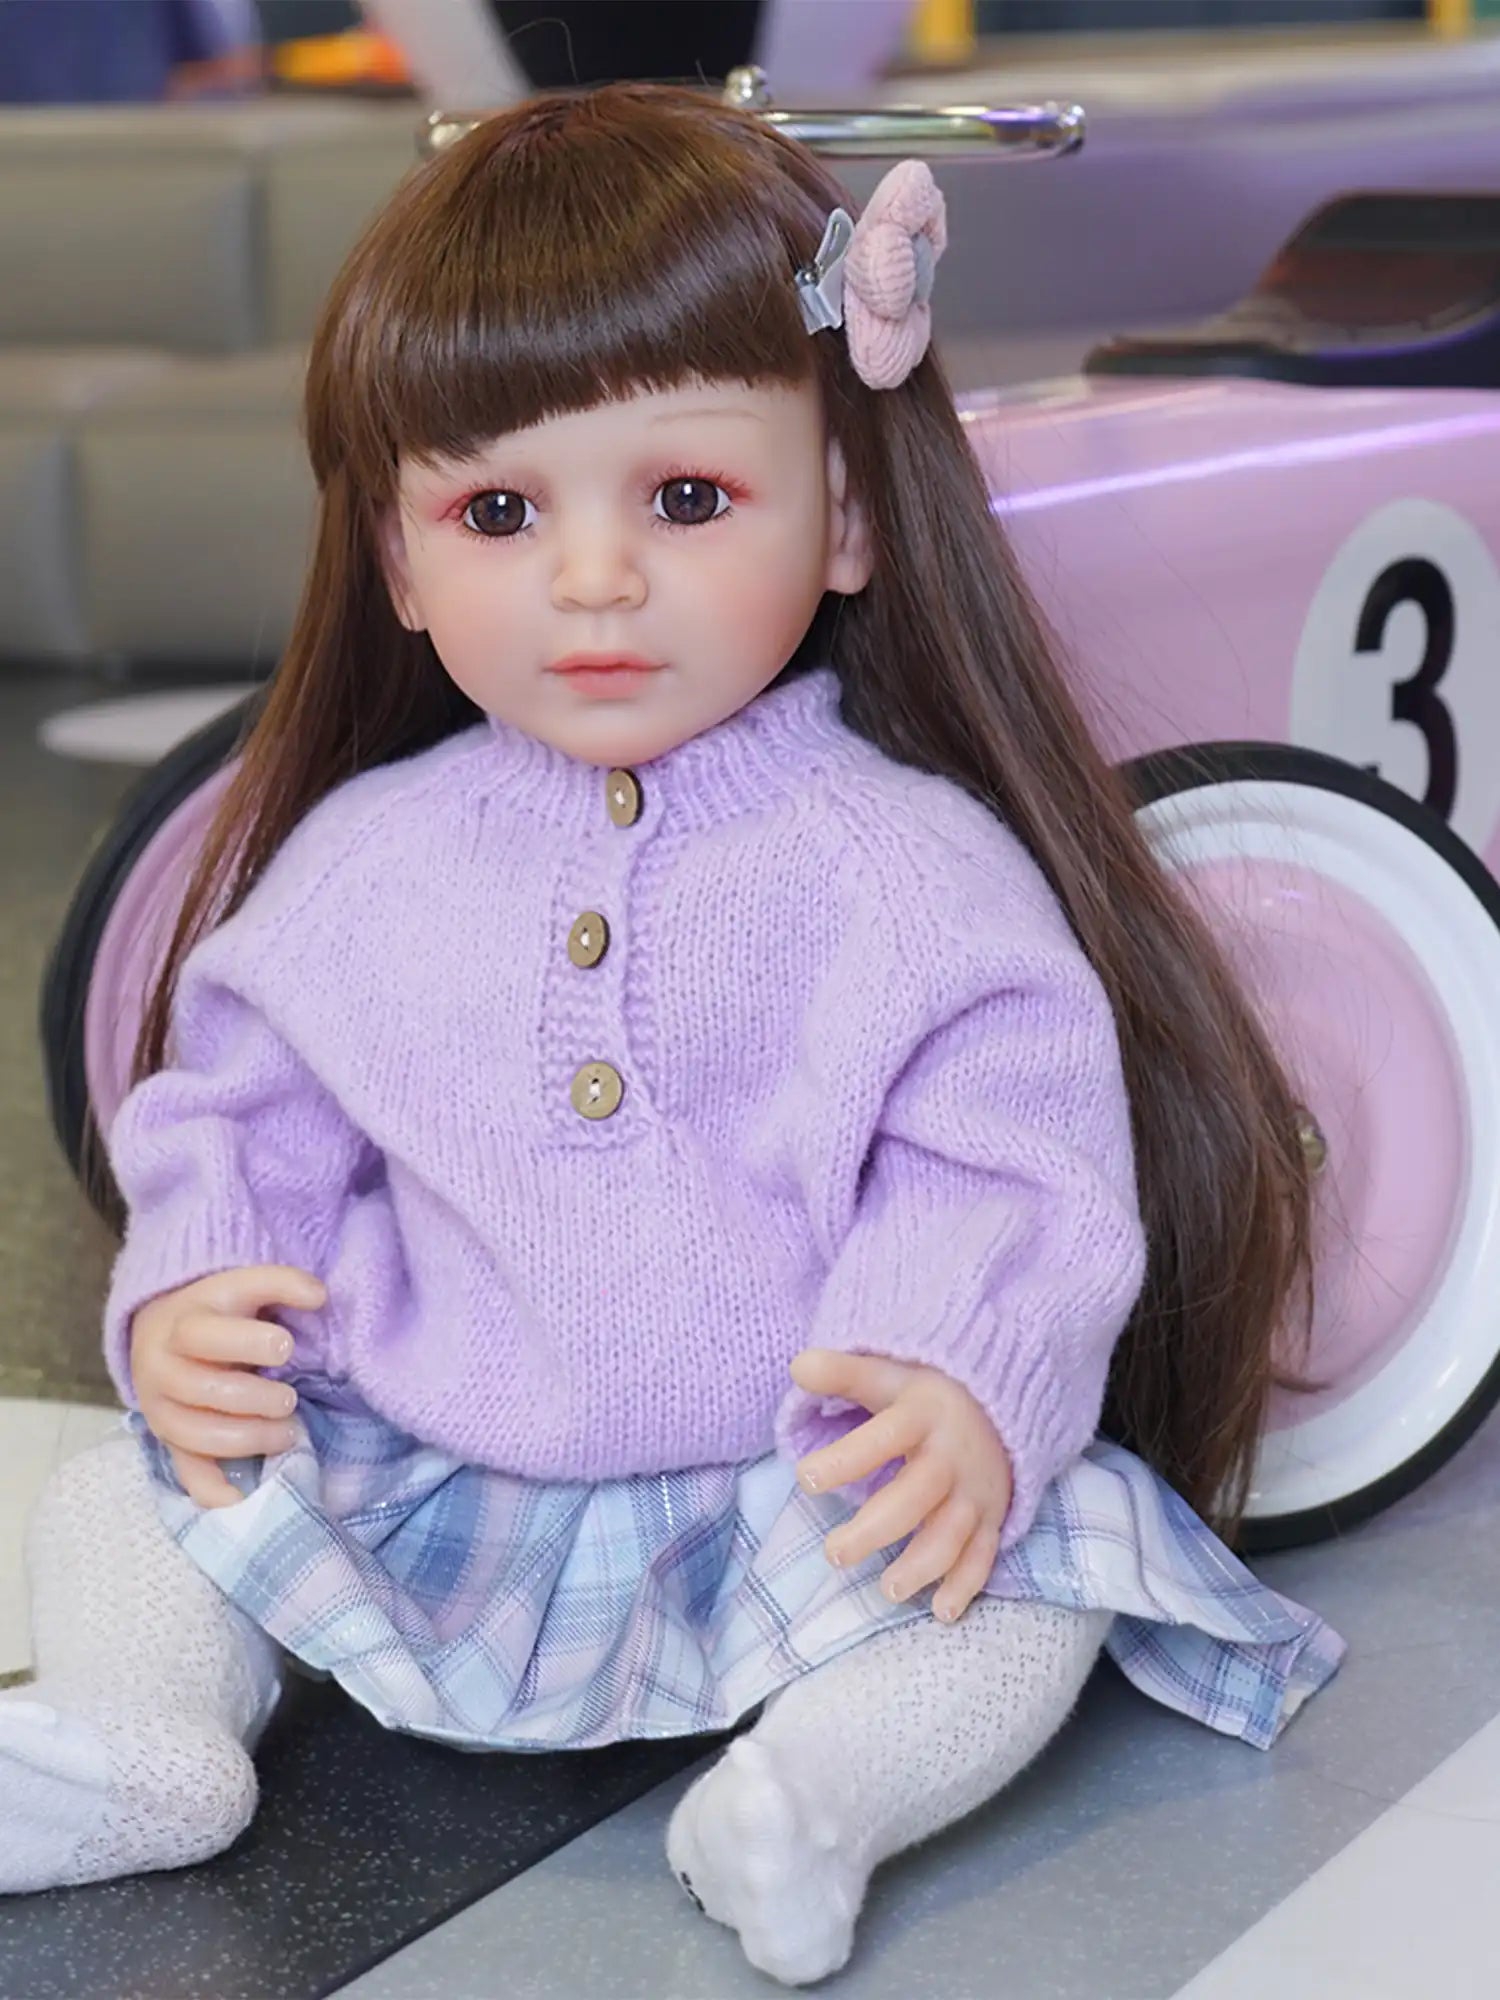 A lifelike toddler doll sits with a lilac knit sweater and a plaid skirt, her brown hair adorned with a pink bow clip.